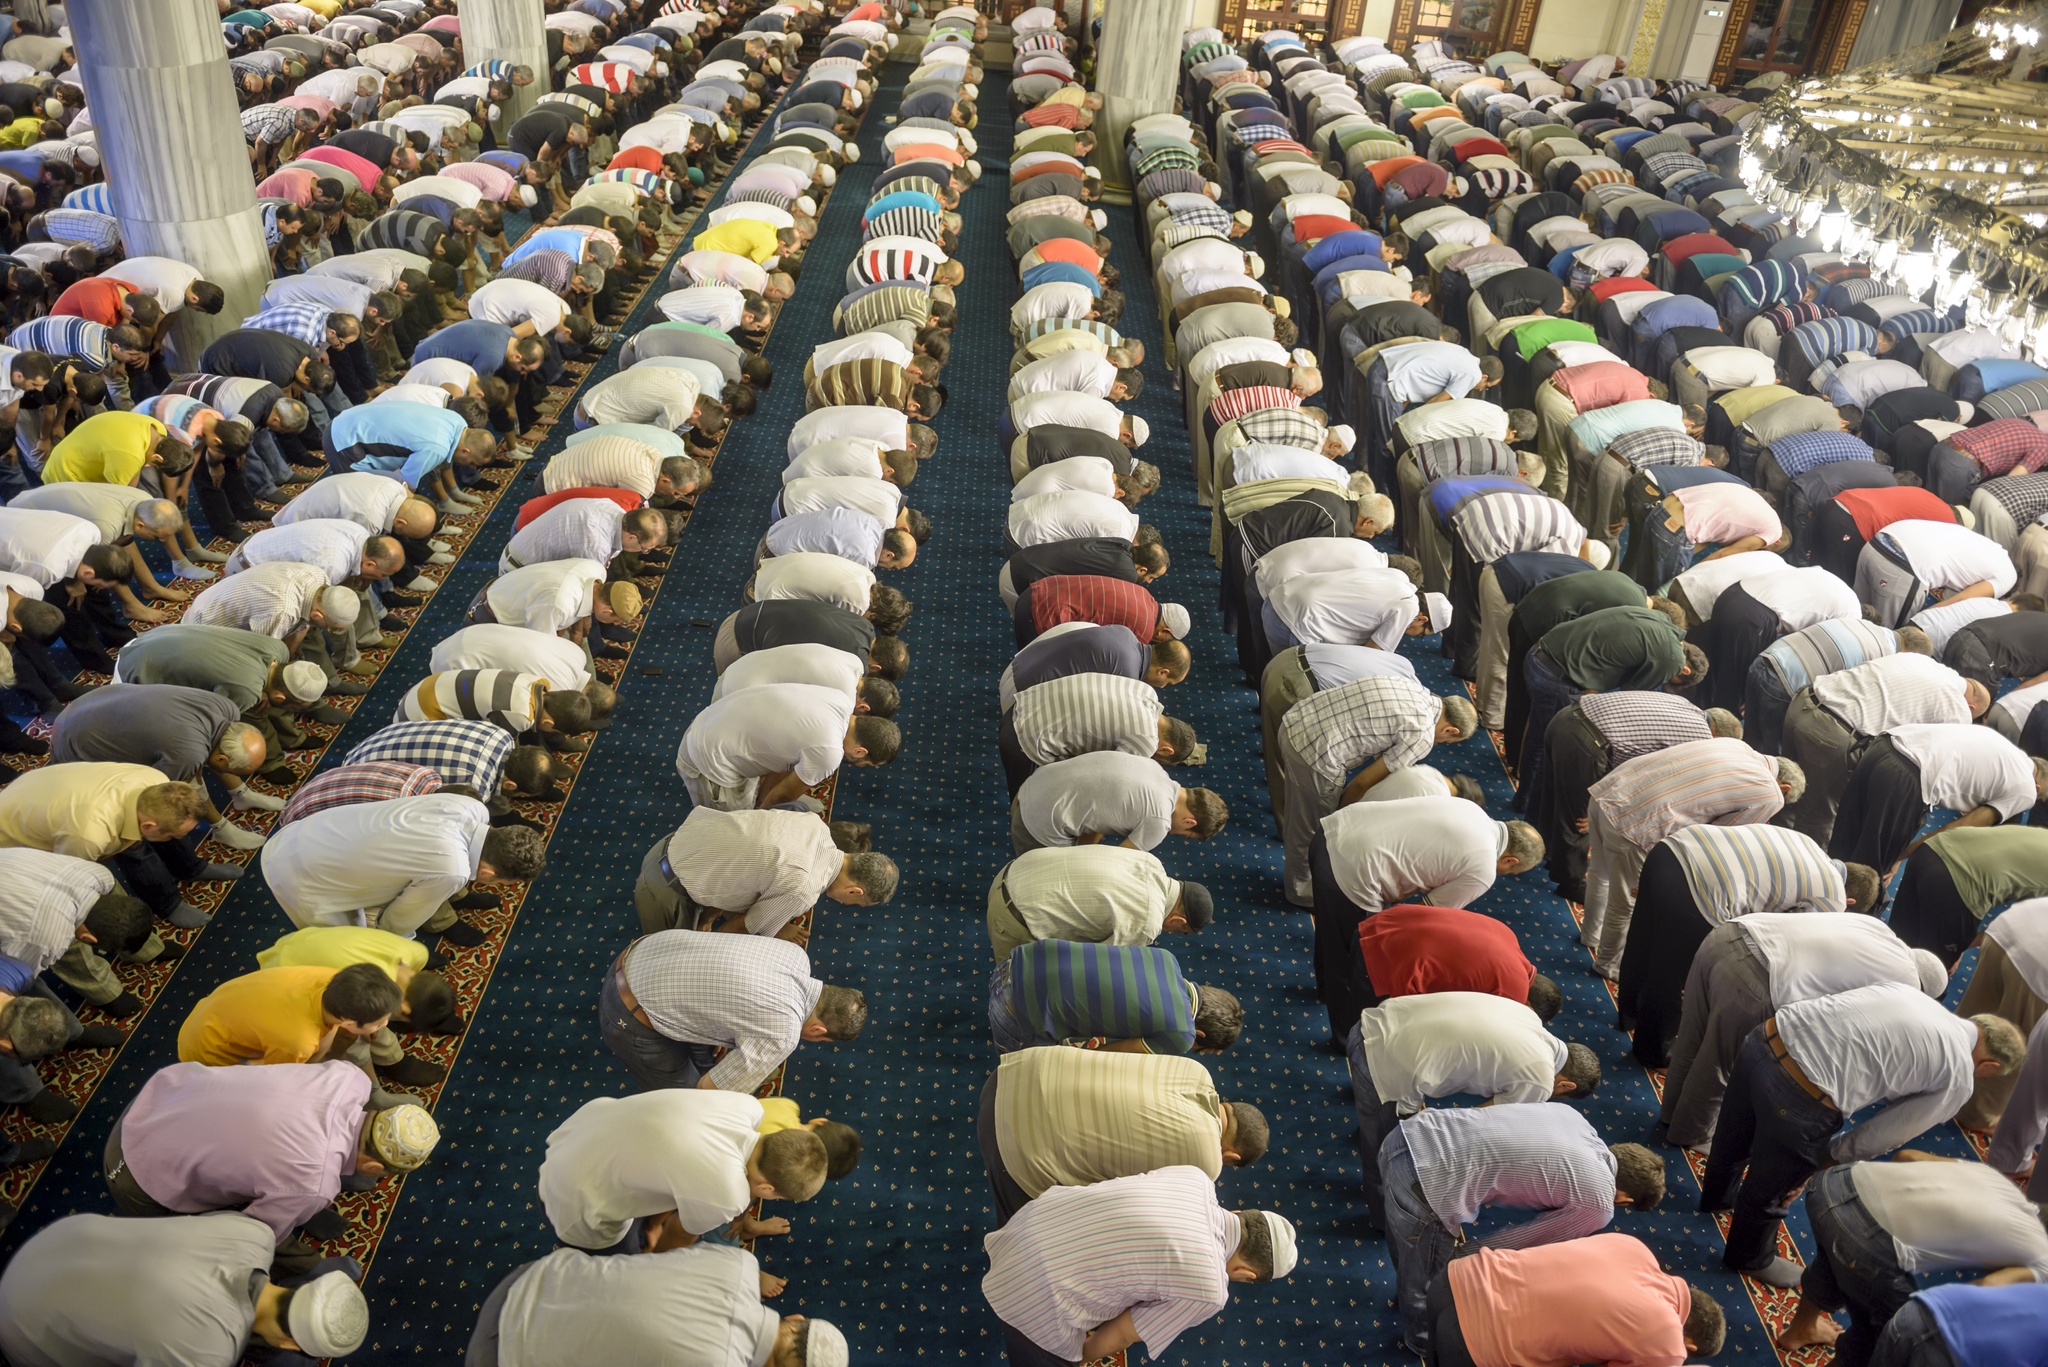 A group of muslim men at prayer, arranged in rows